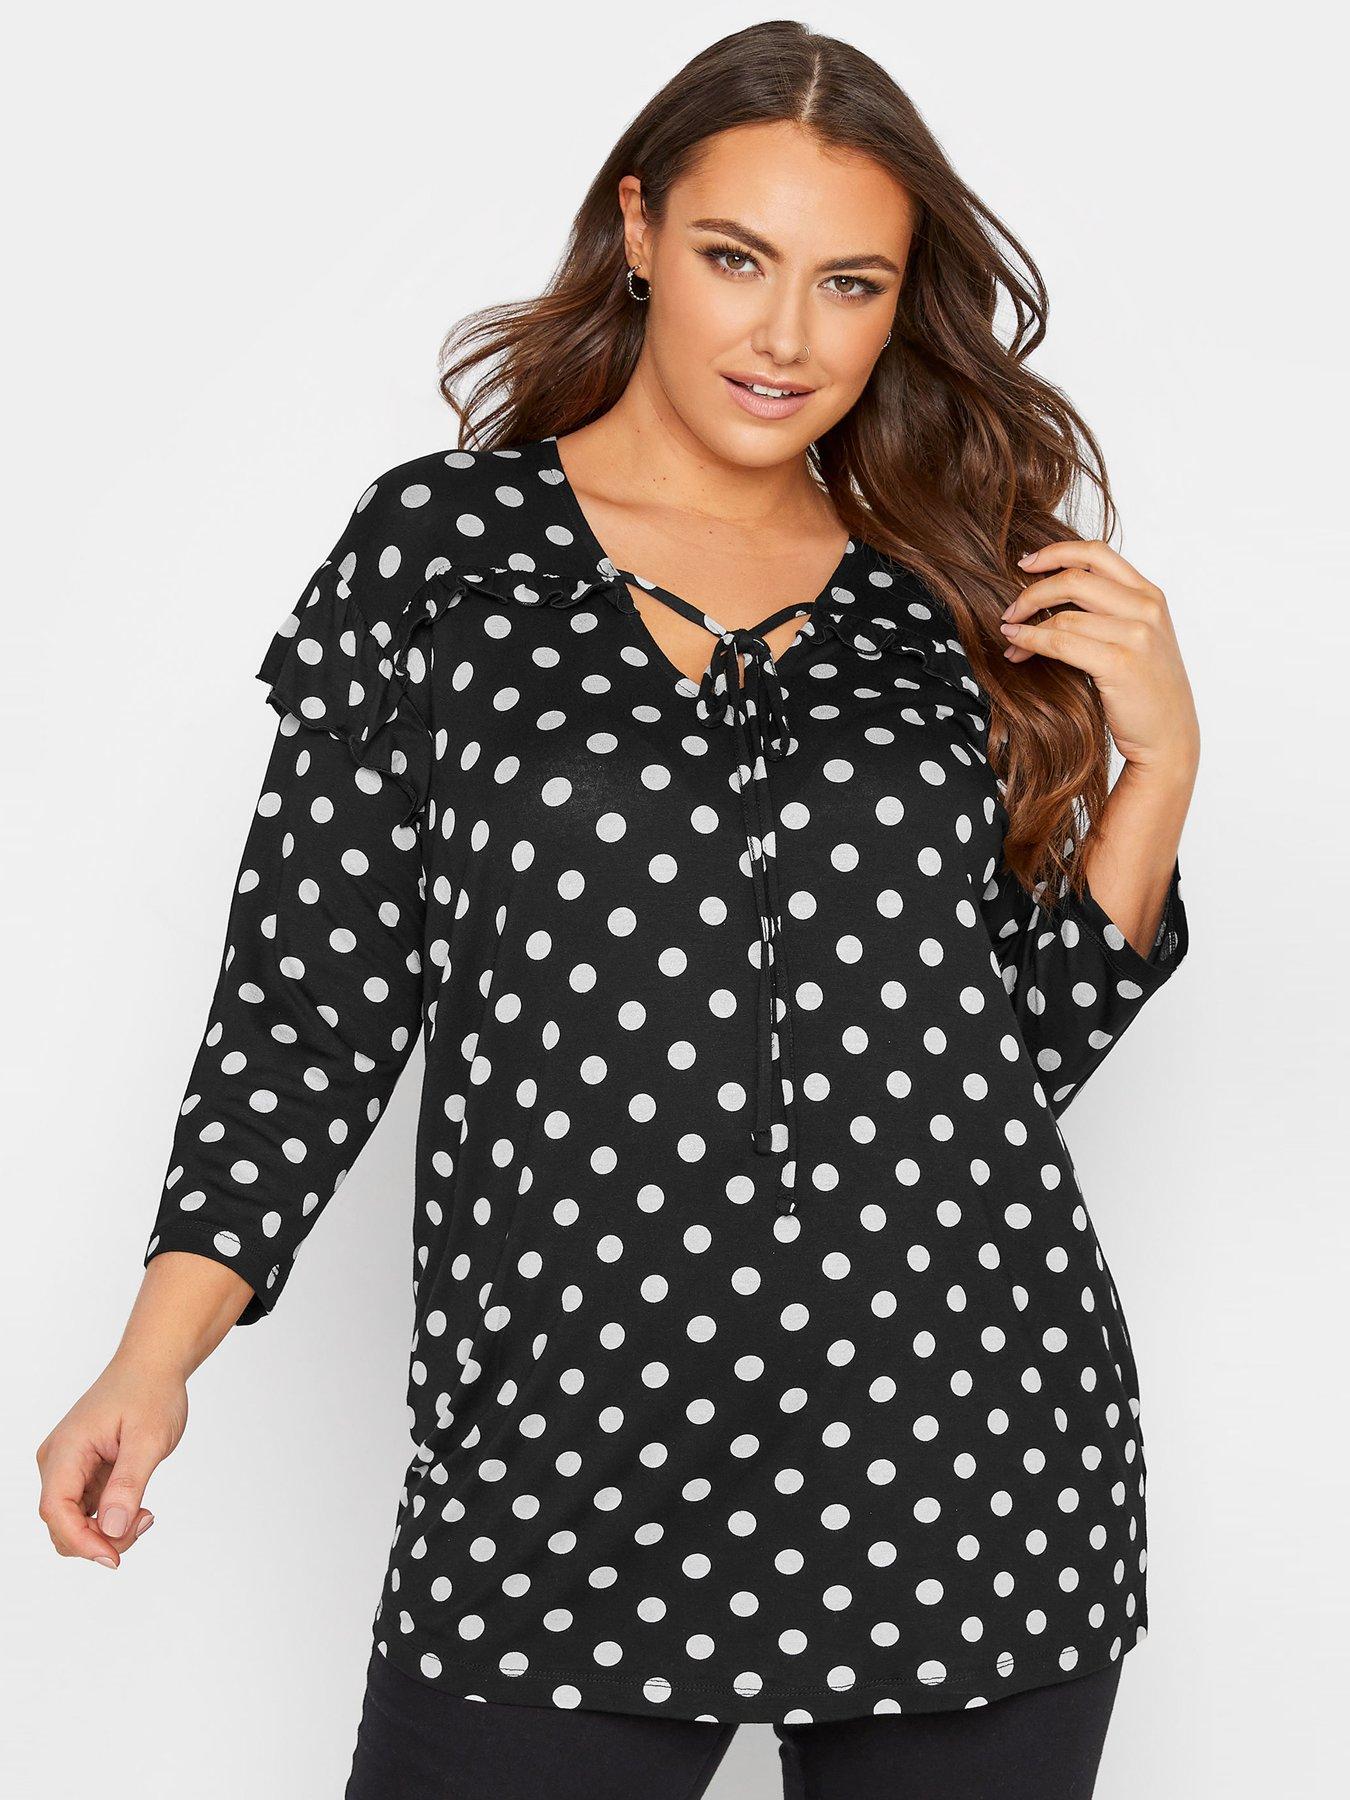 Women Clothing Spot Top With Front Cord Detail